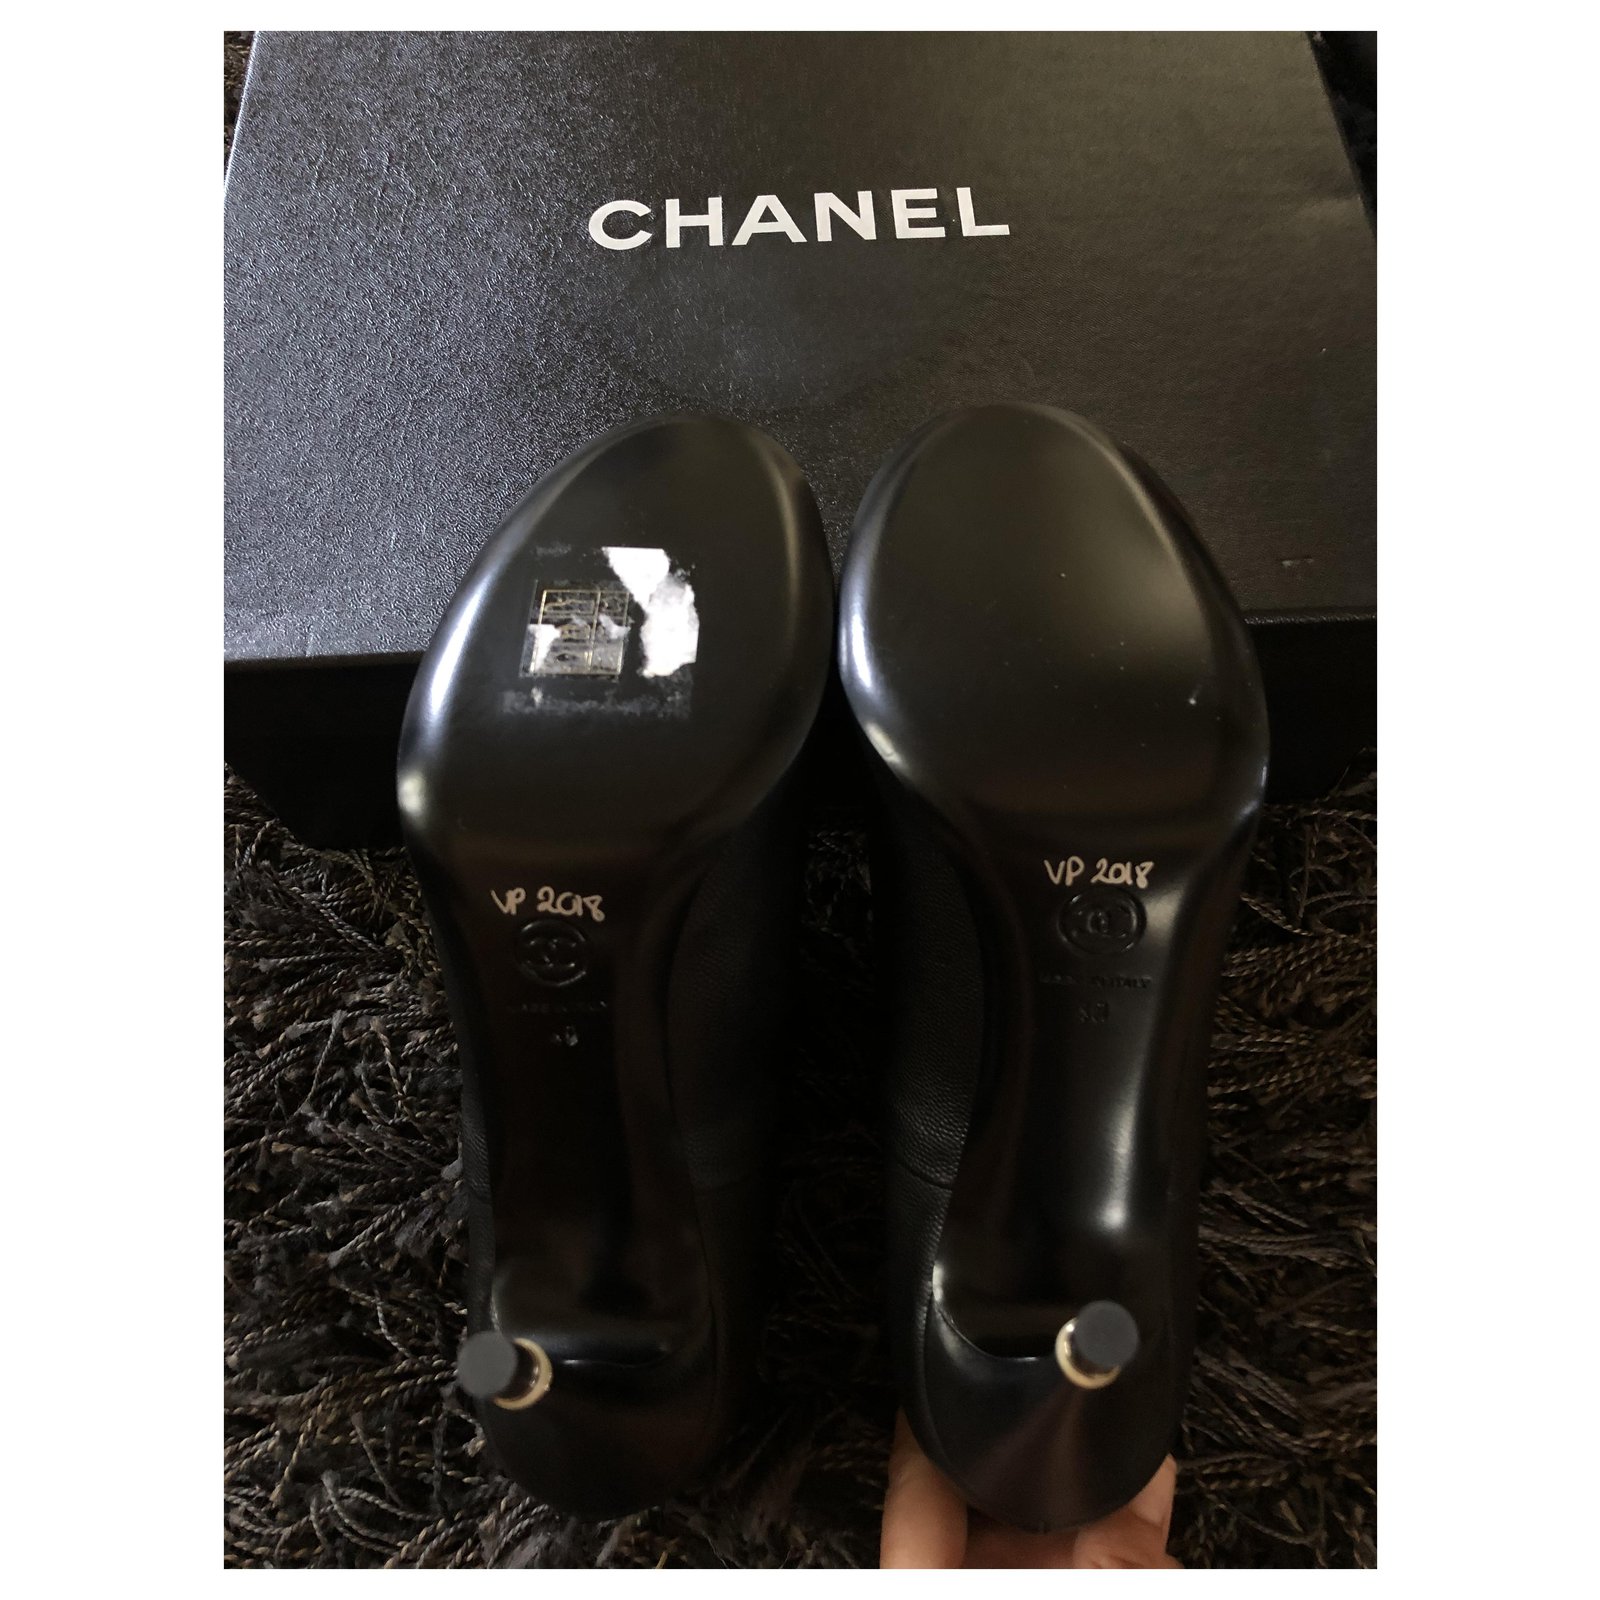 CHANEL Ankle Boots & Booties for Women - Poshmark